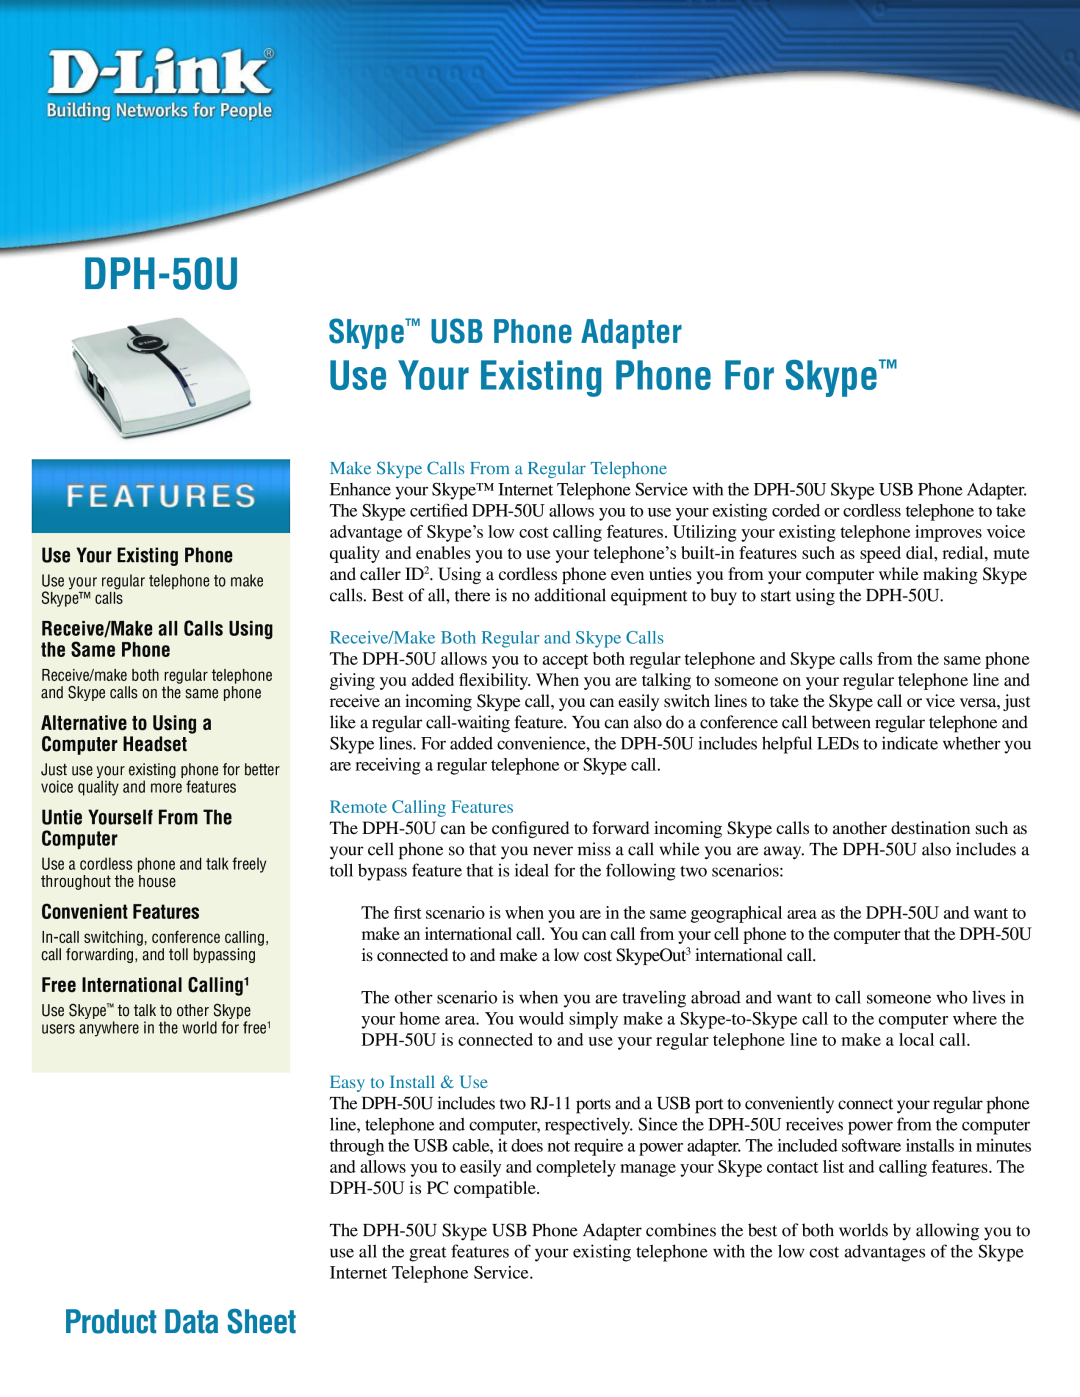 D-Link DPH-50U manual Skype USB Phone Adapter, Product Data Sheet, Use Your Existing Phone For Skype, Convenient Features 